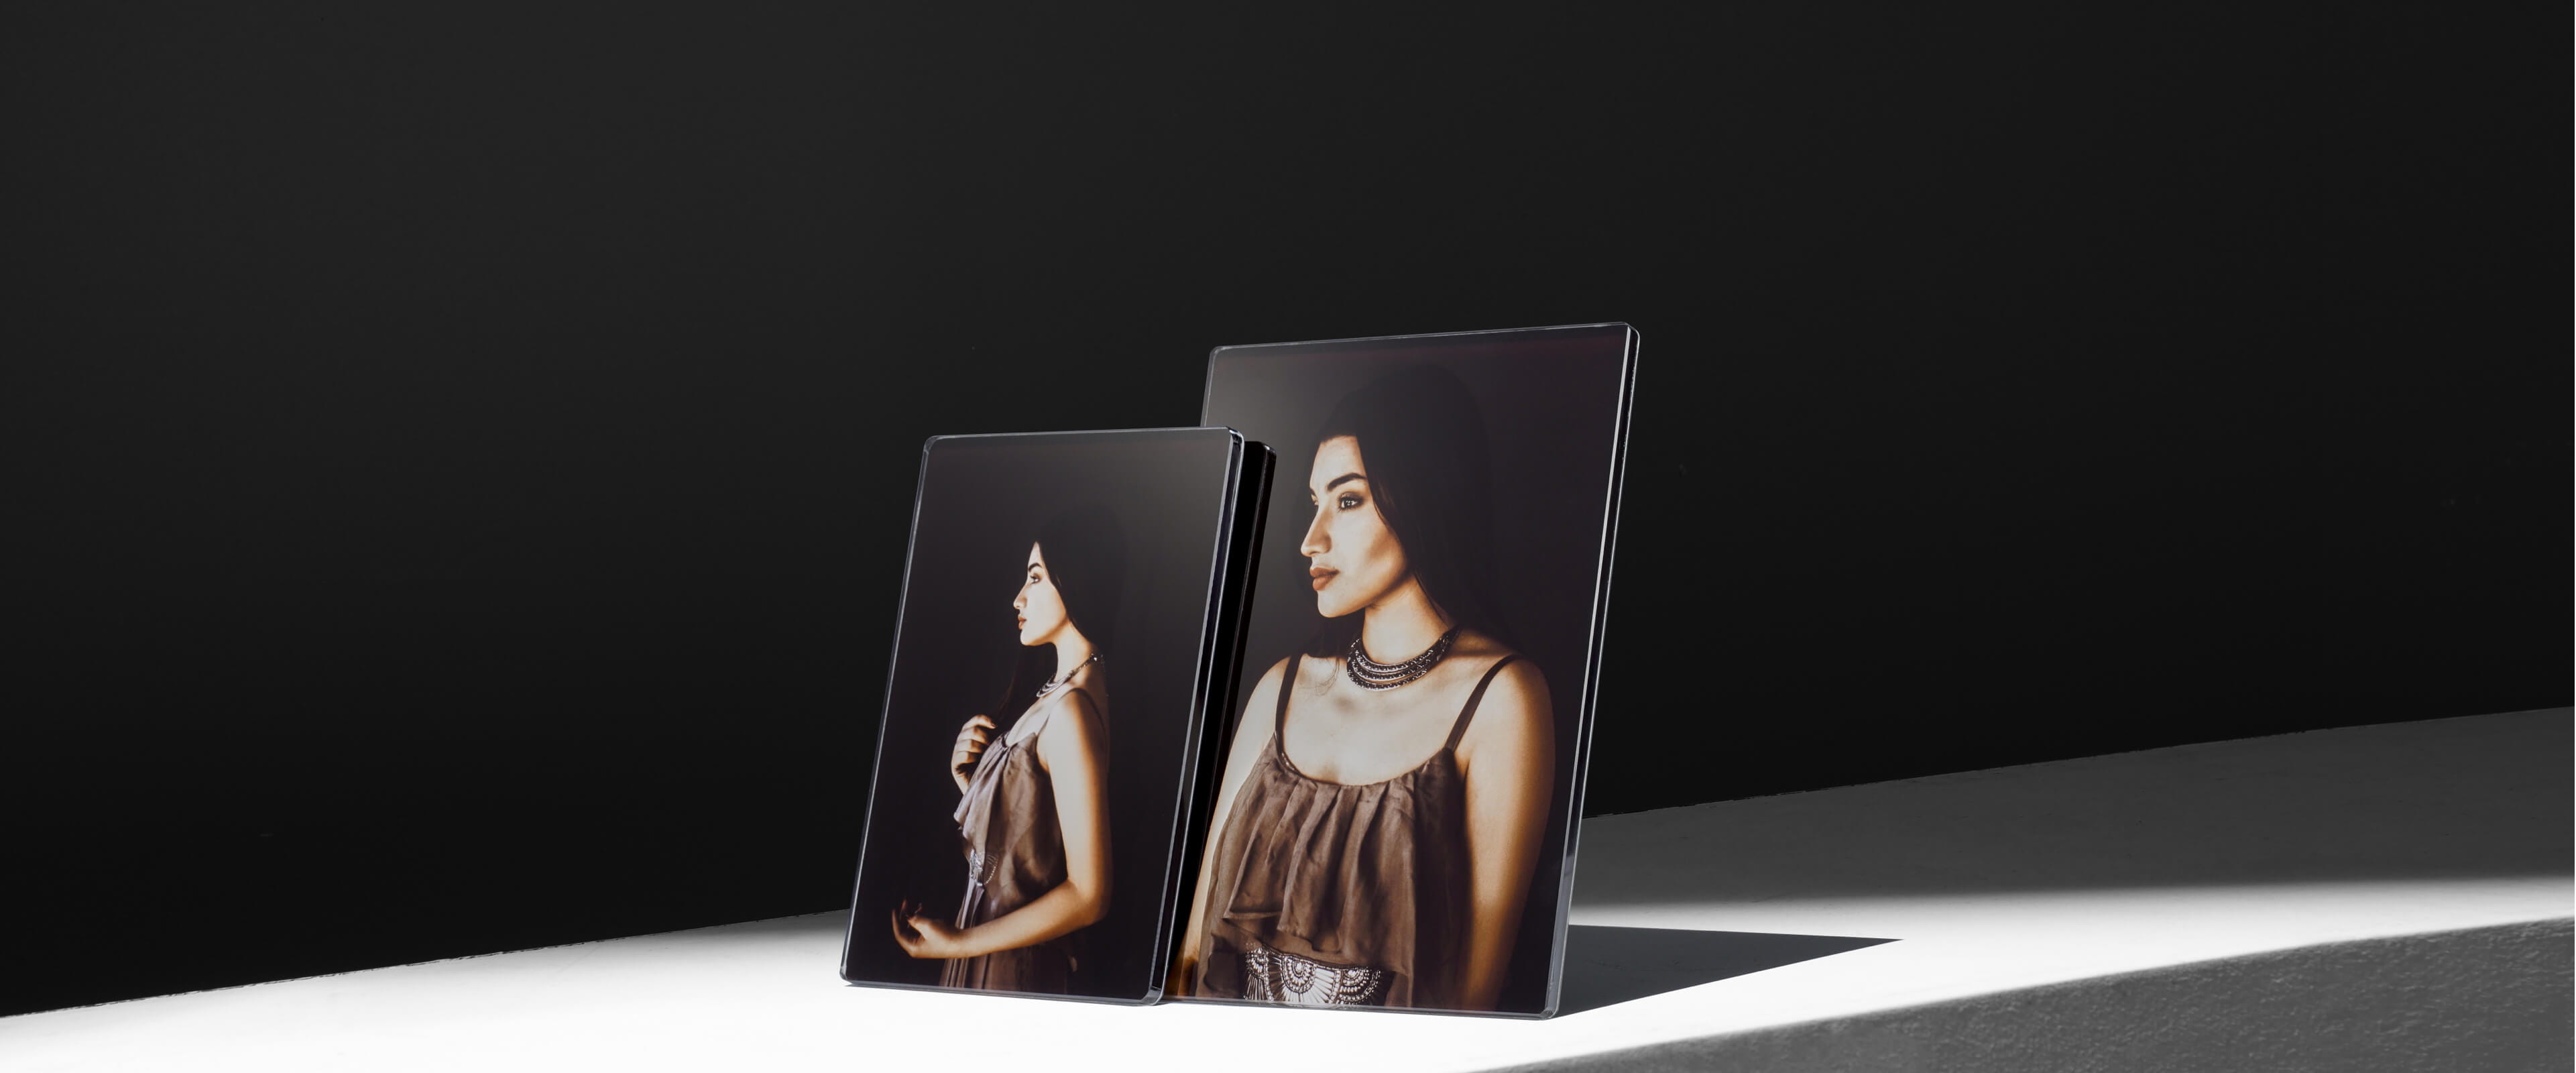 two acrylic photo plaques standing on a white table showing a woman in dress